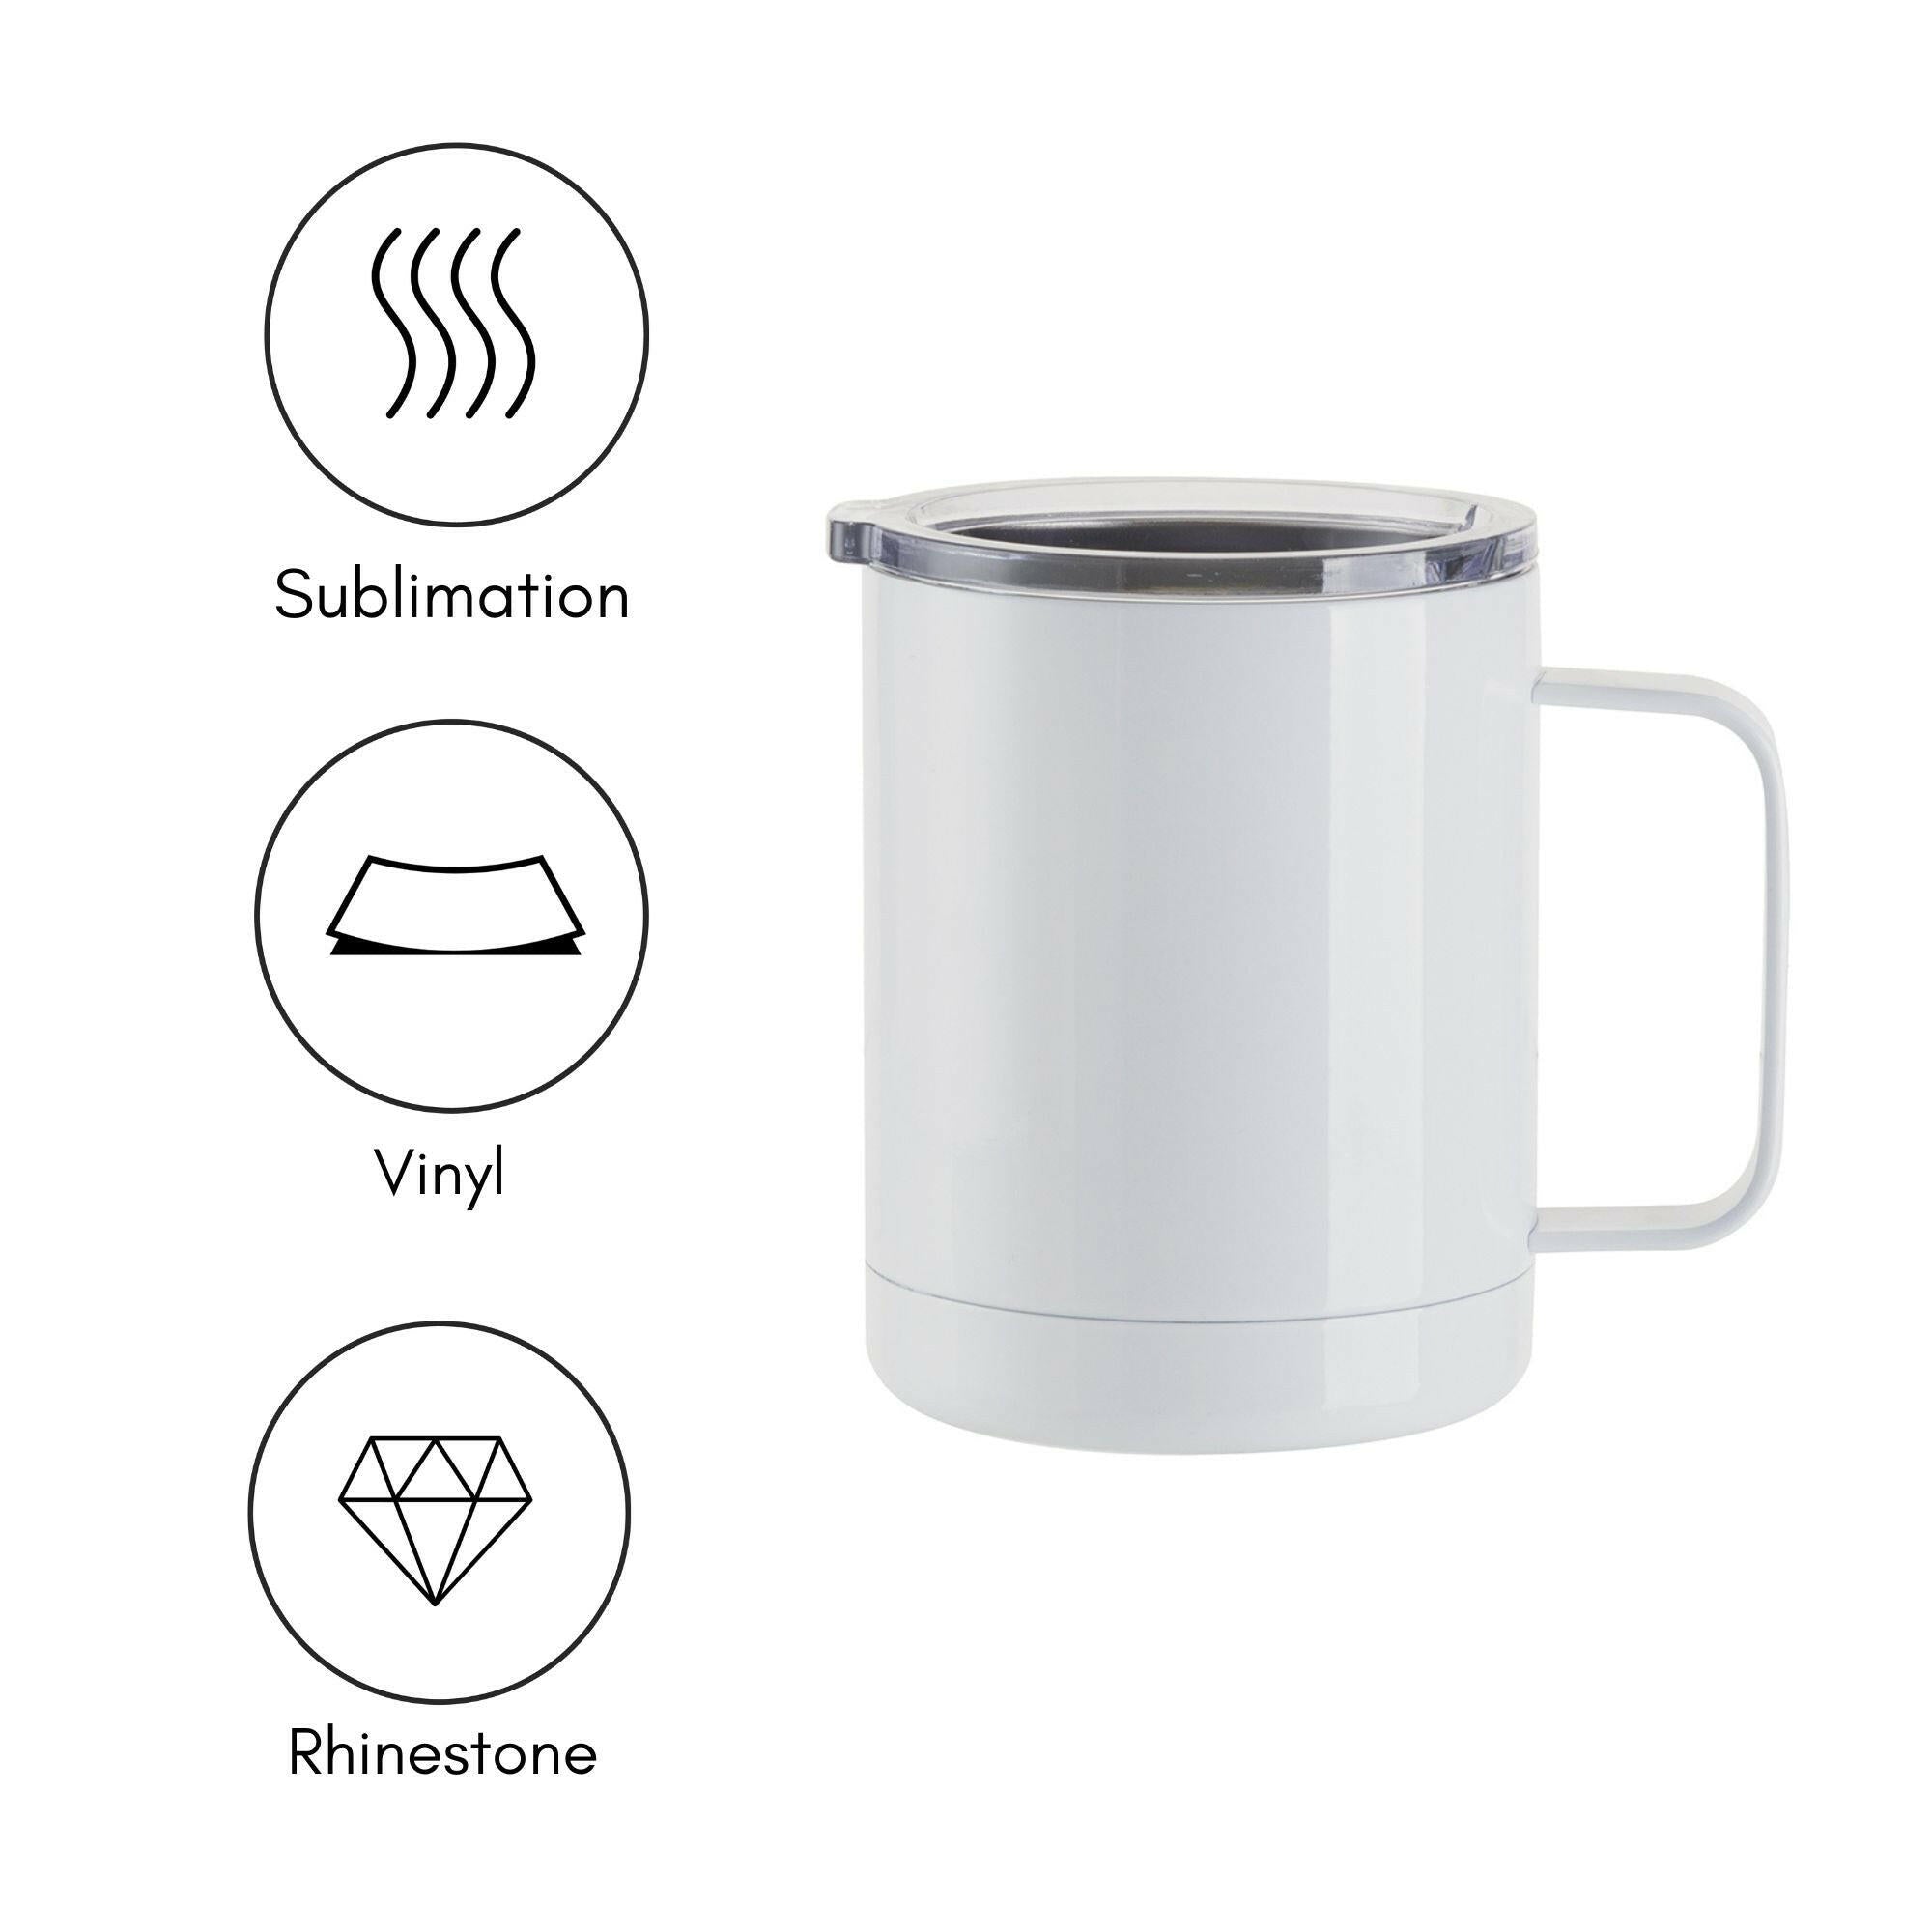 12oz Stainless Steel Sublimation Lidded Mugs - 4 Pack.